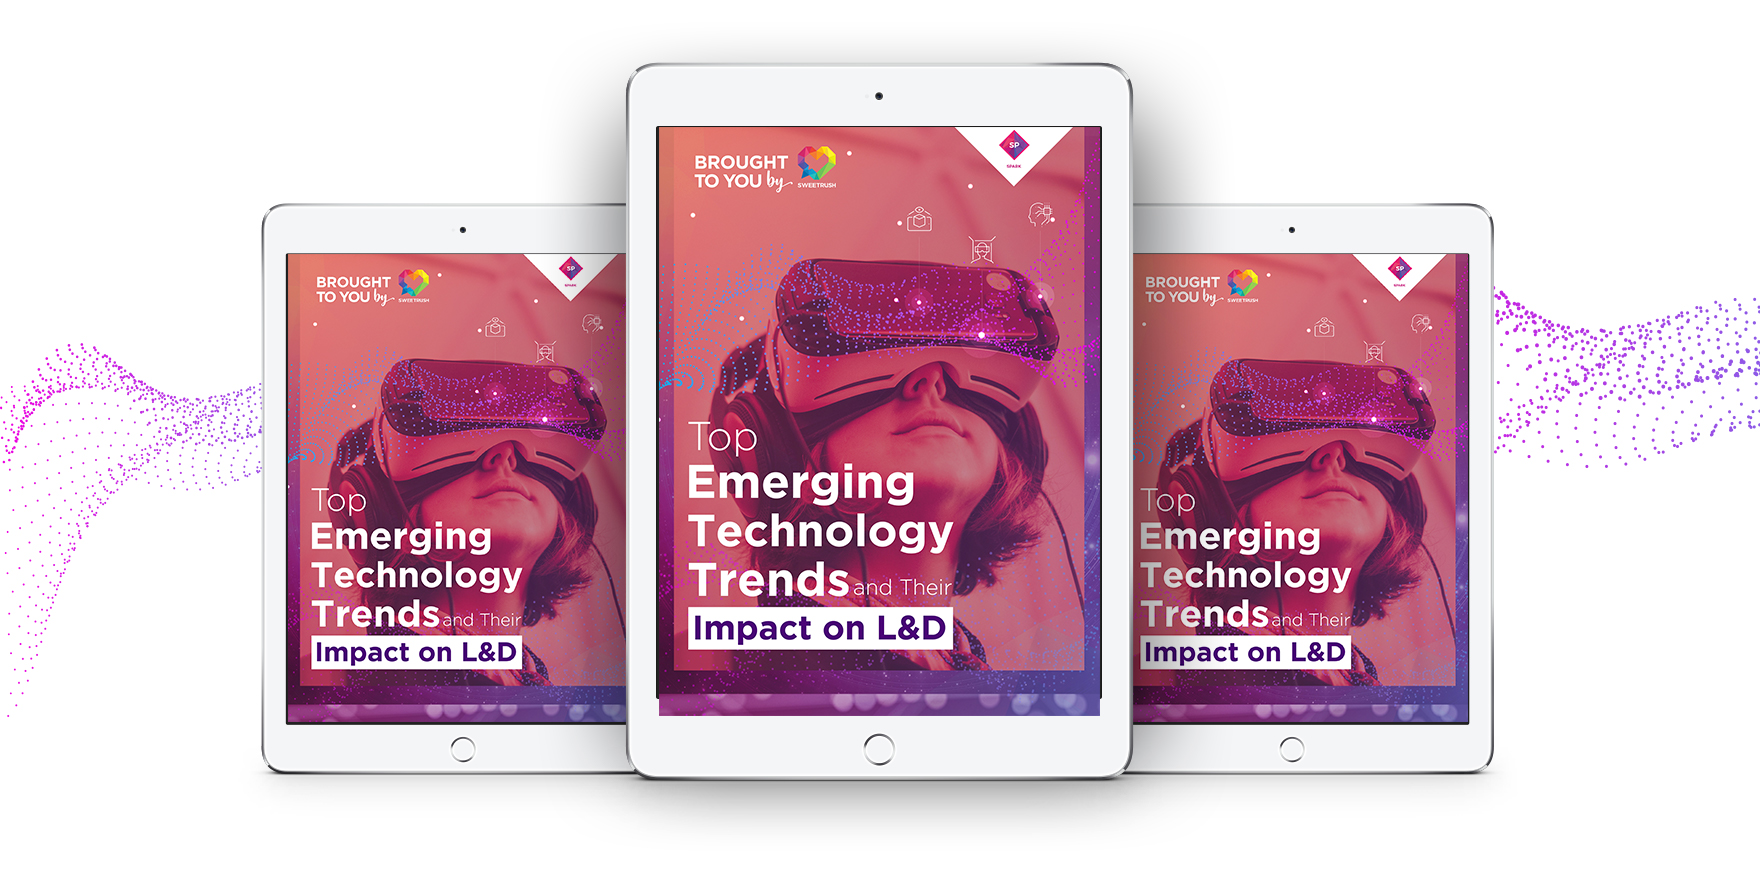 SweetRush Presents New eBook on Emerging Technology Trends